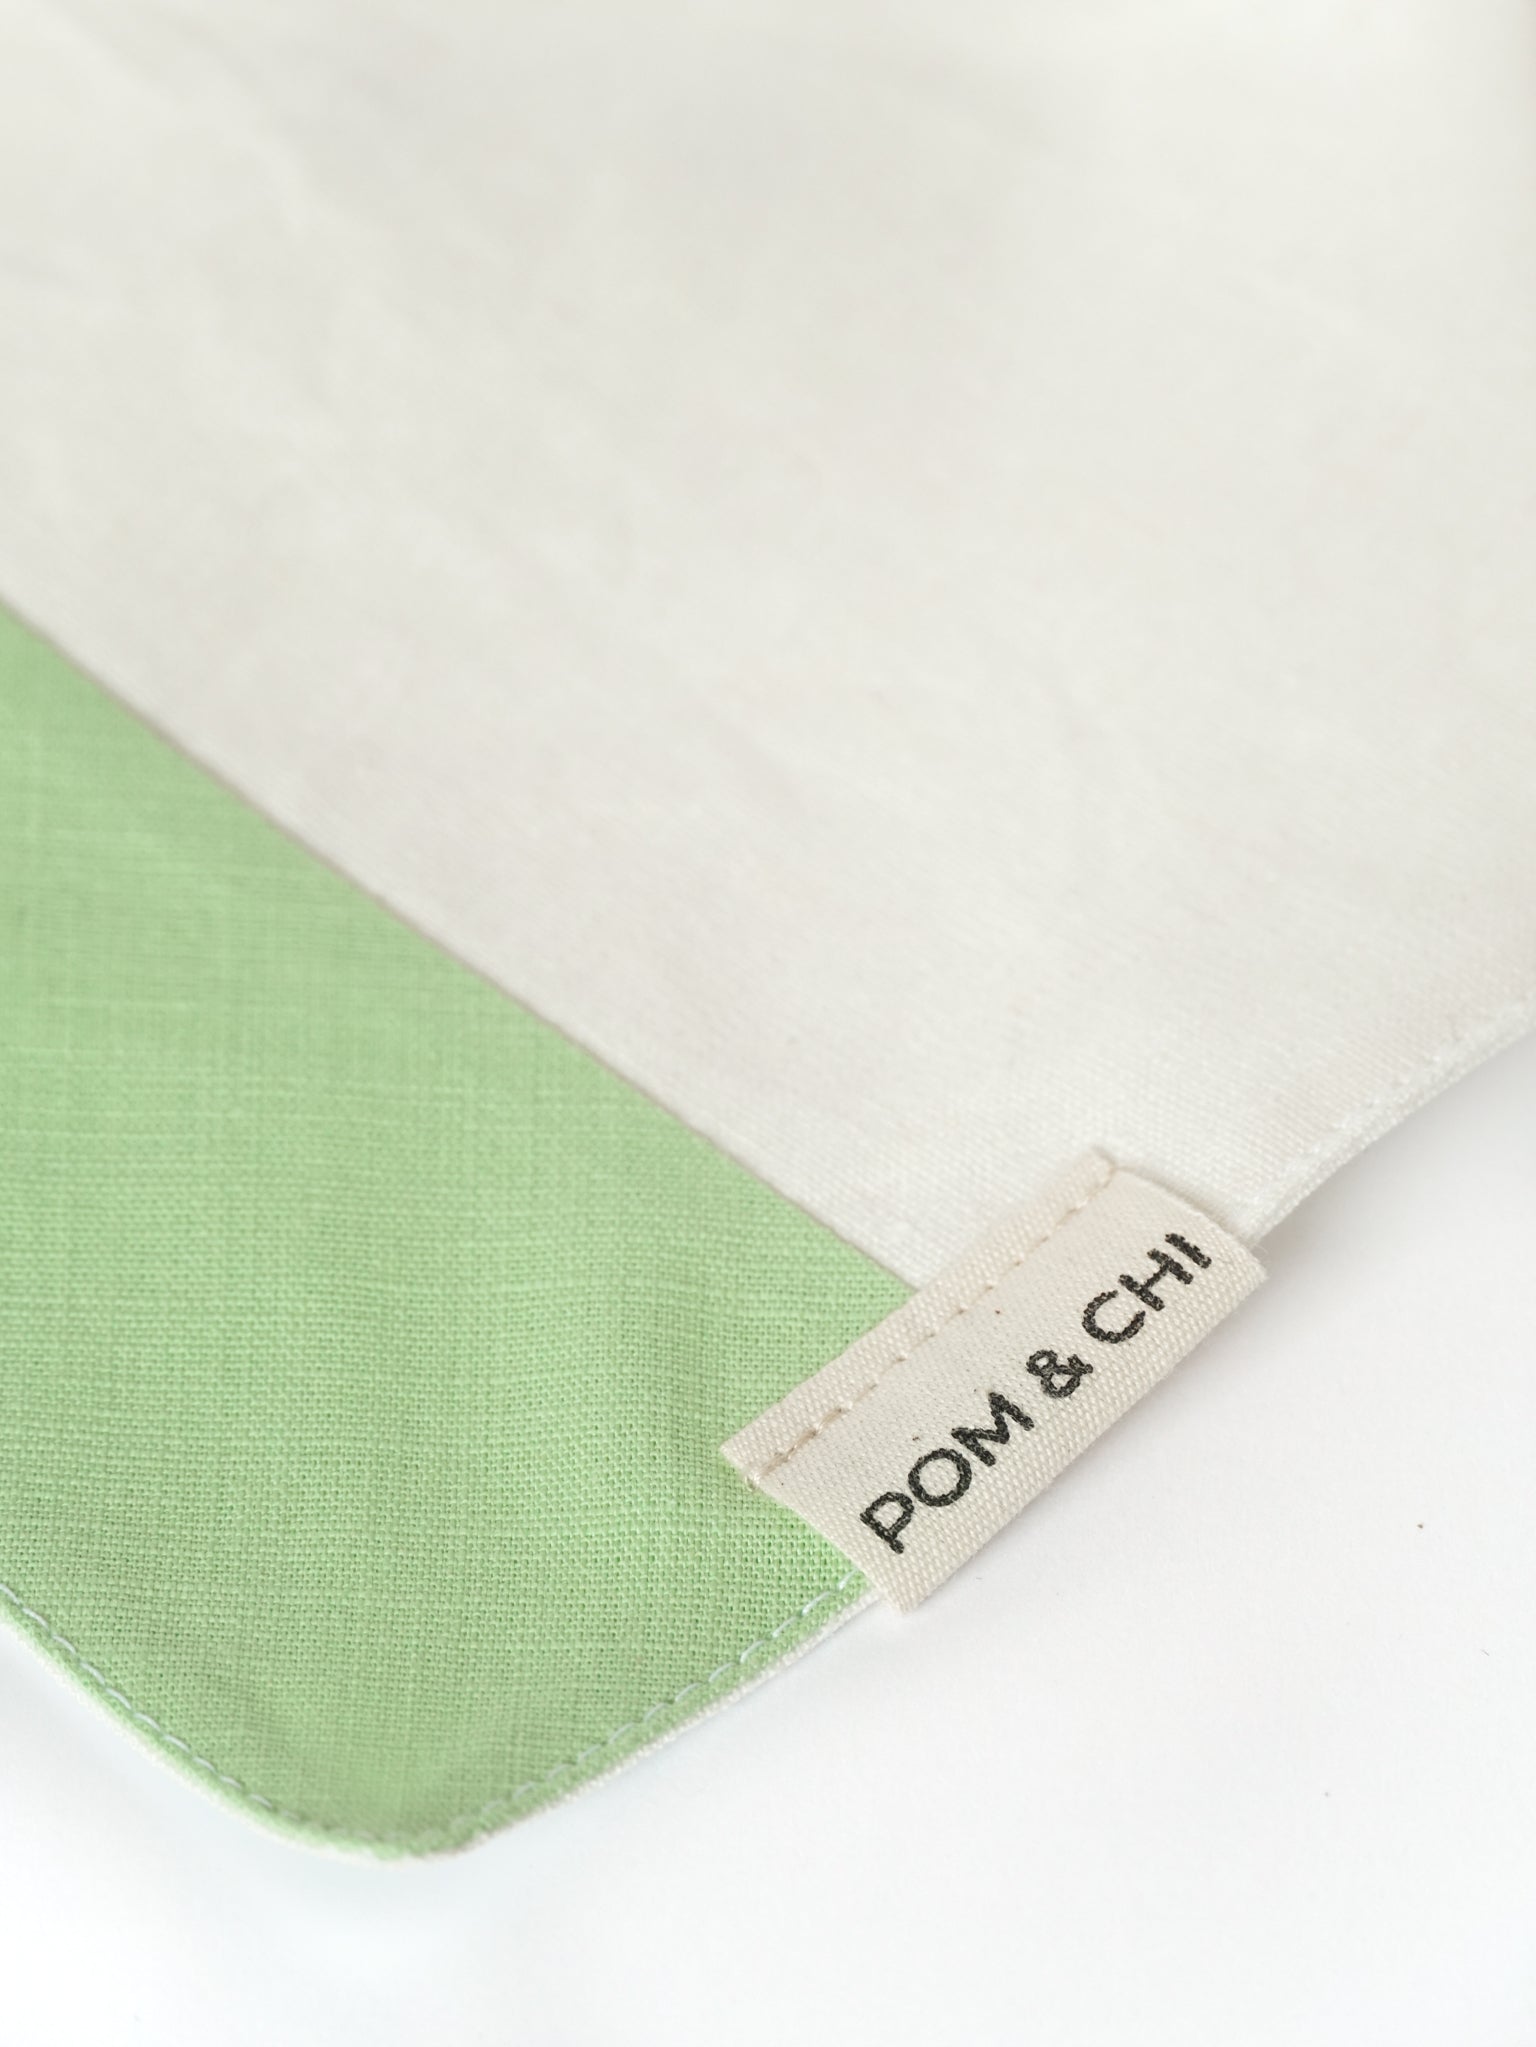 Pom & Chi Sustainable Small Dog Bandana Spring In My Step in Mint Green